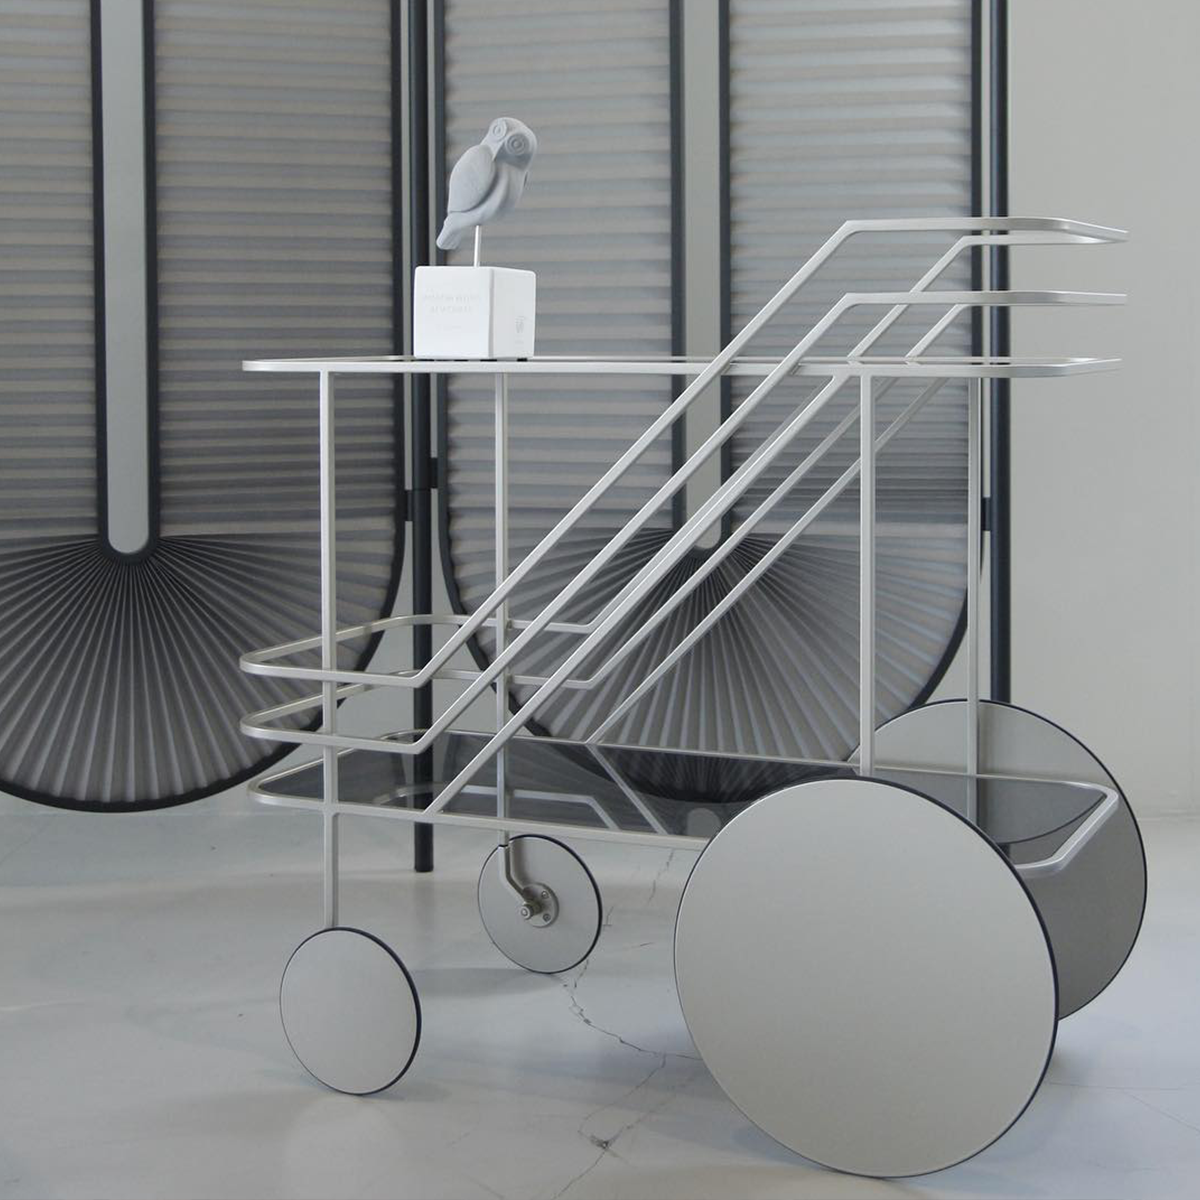 Dante - Goods and Bads Minima Moralia room divider and Come As You Are bar cart trolley by Christophe de la Fontaine